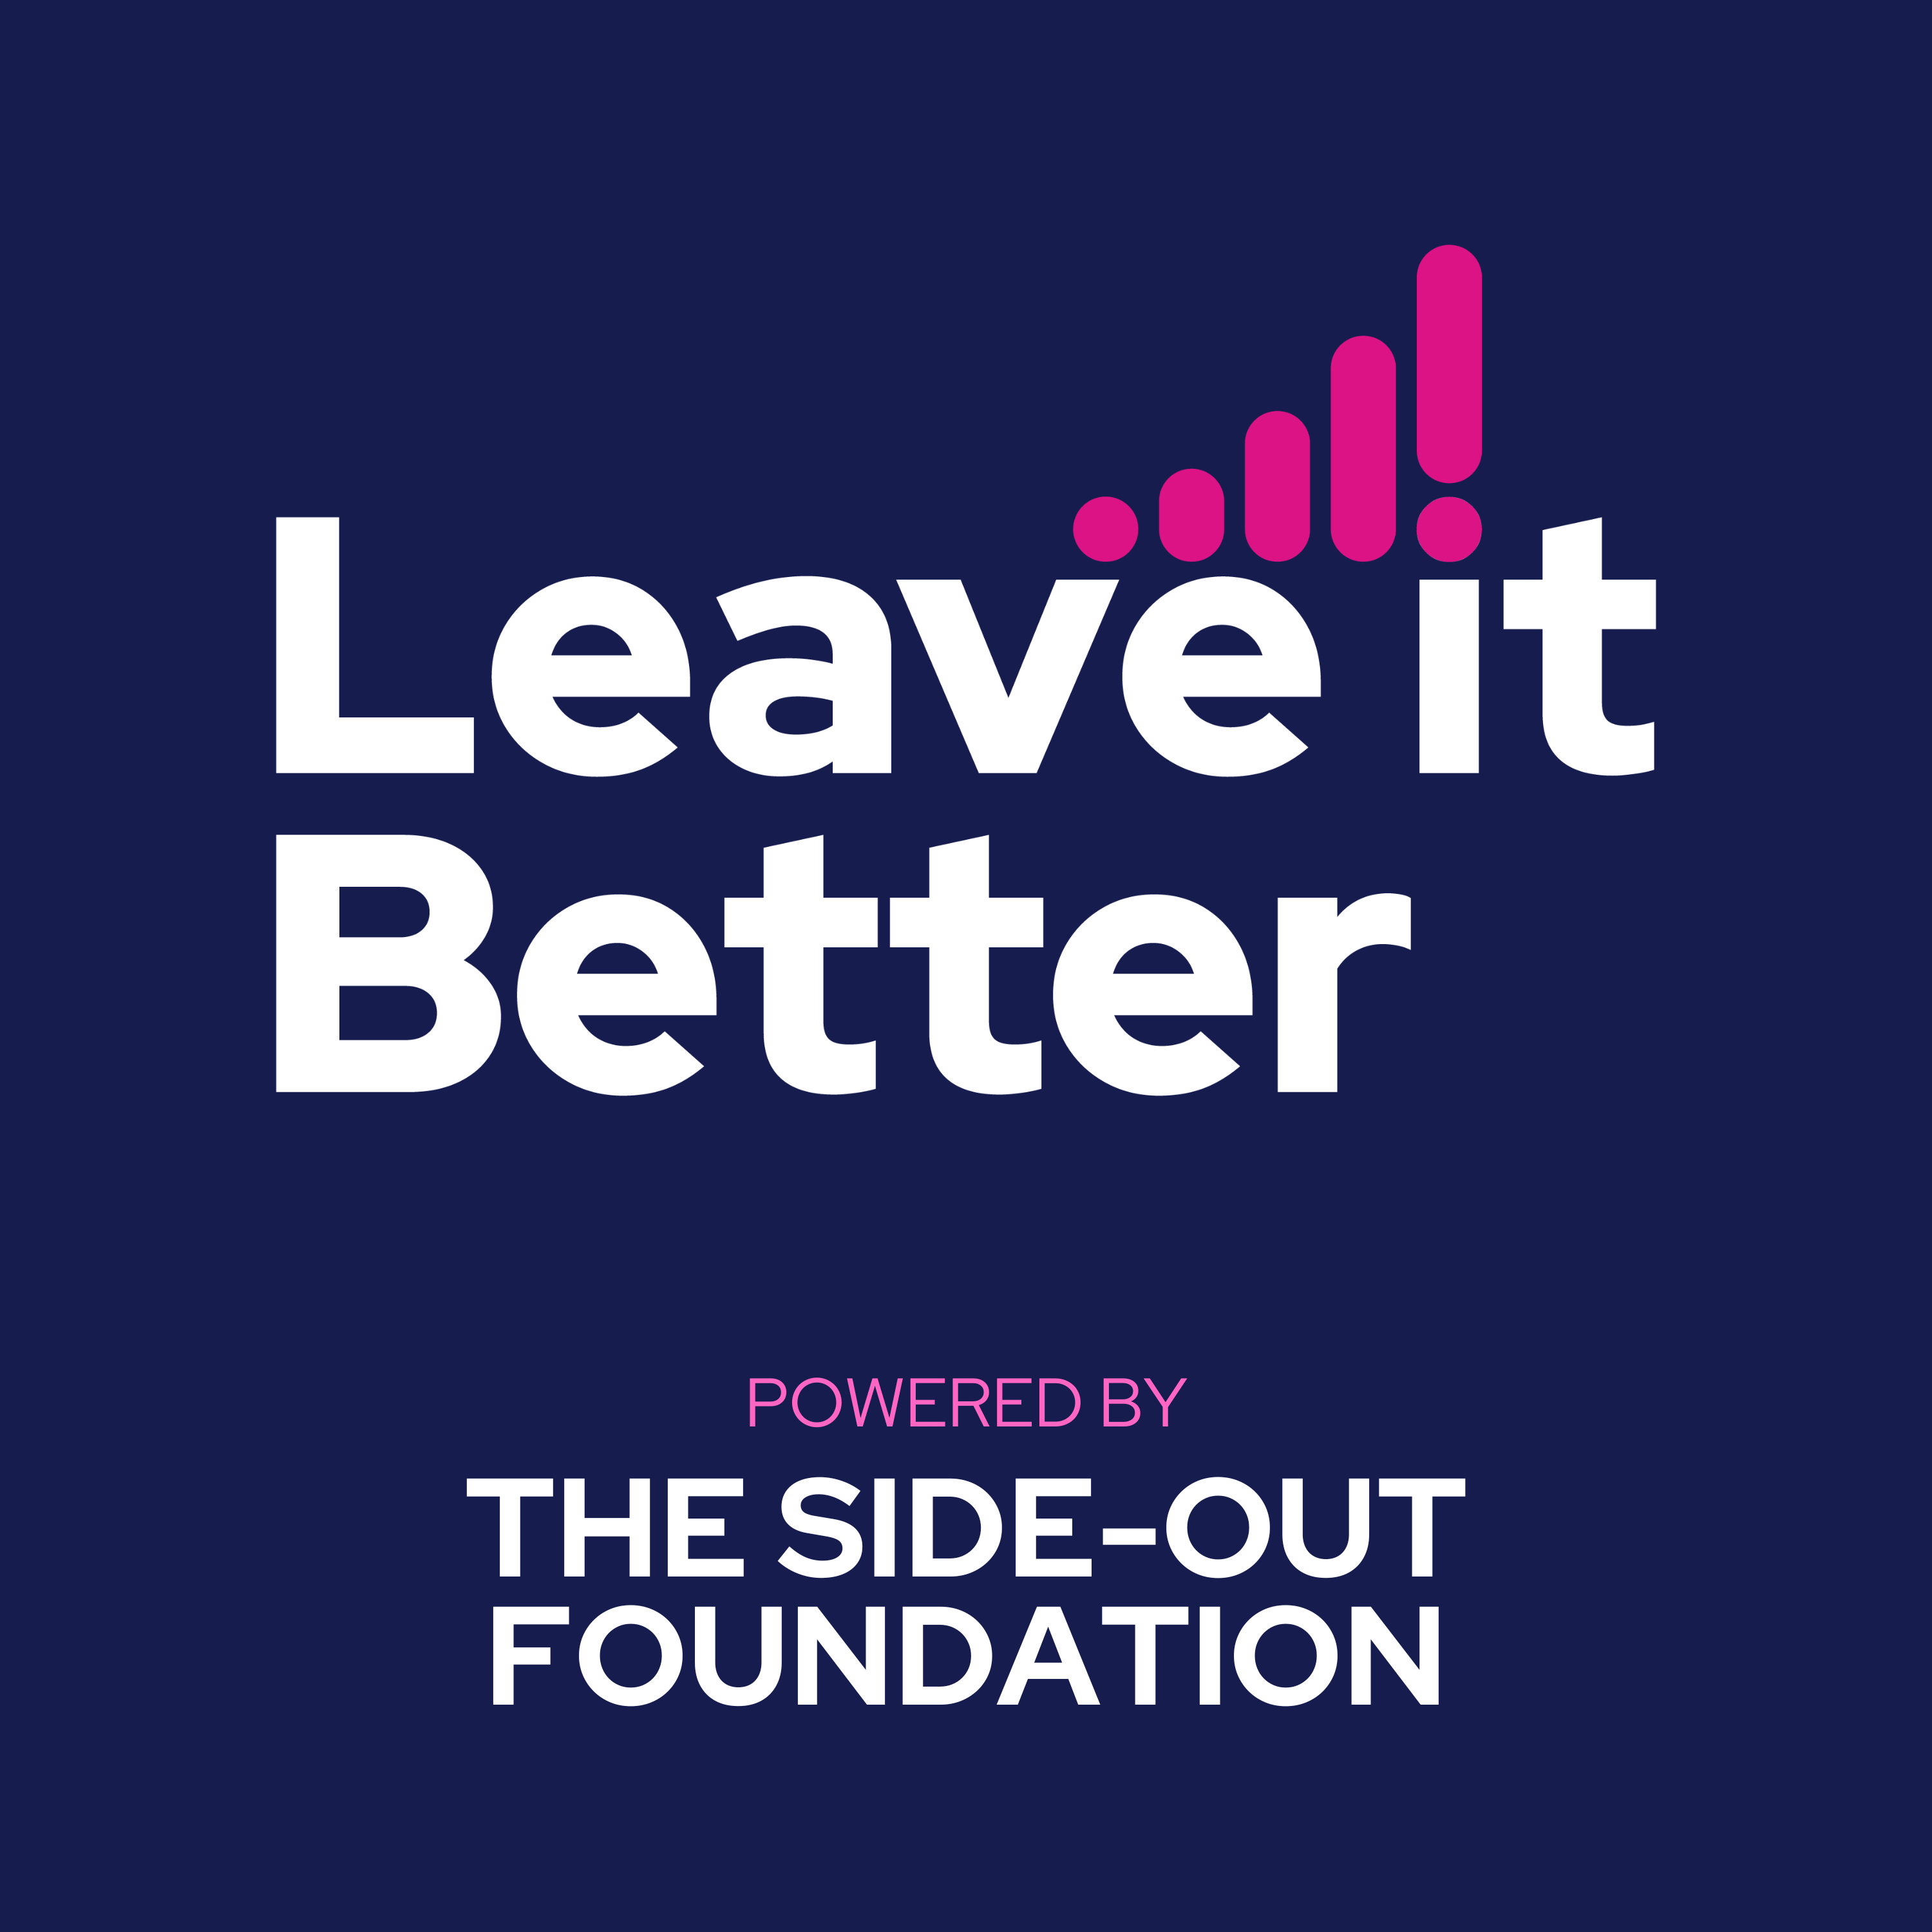 Trailer: The Leave It Better Podcast powered by The Side-Out Foundation